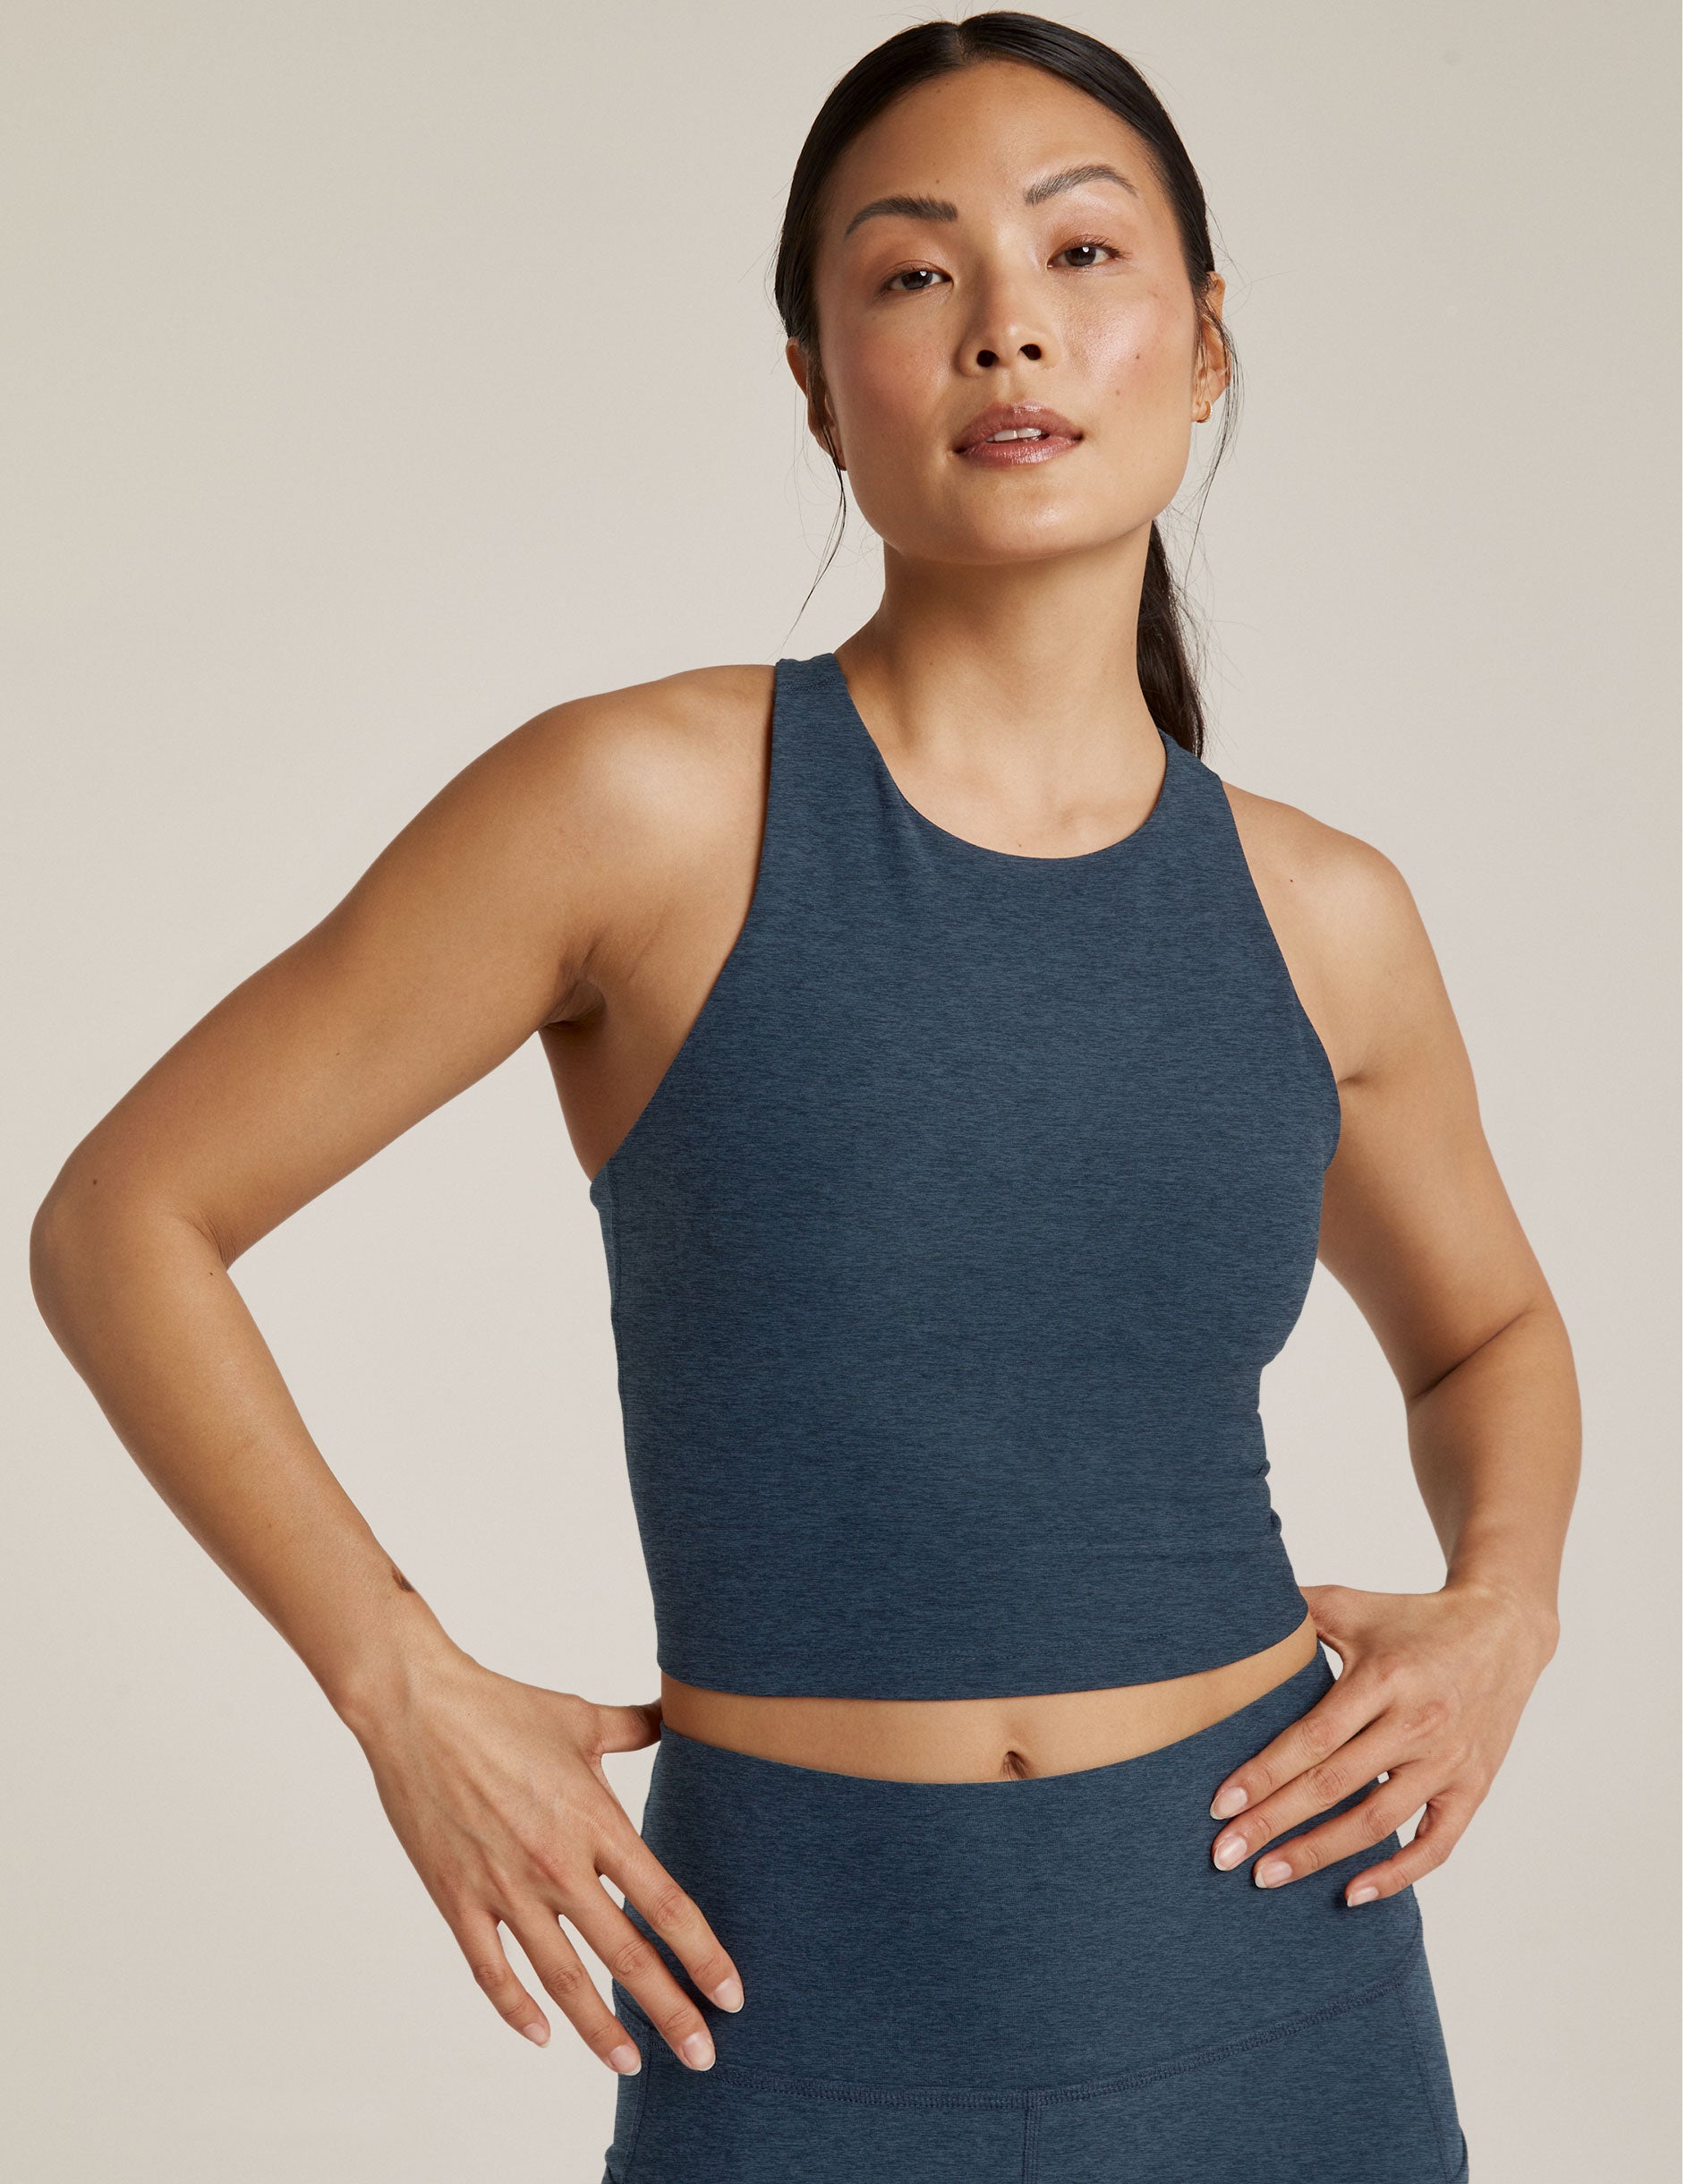 Outdoor Voices TechSweat Crop Top , A high coverage